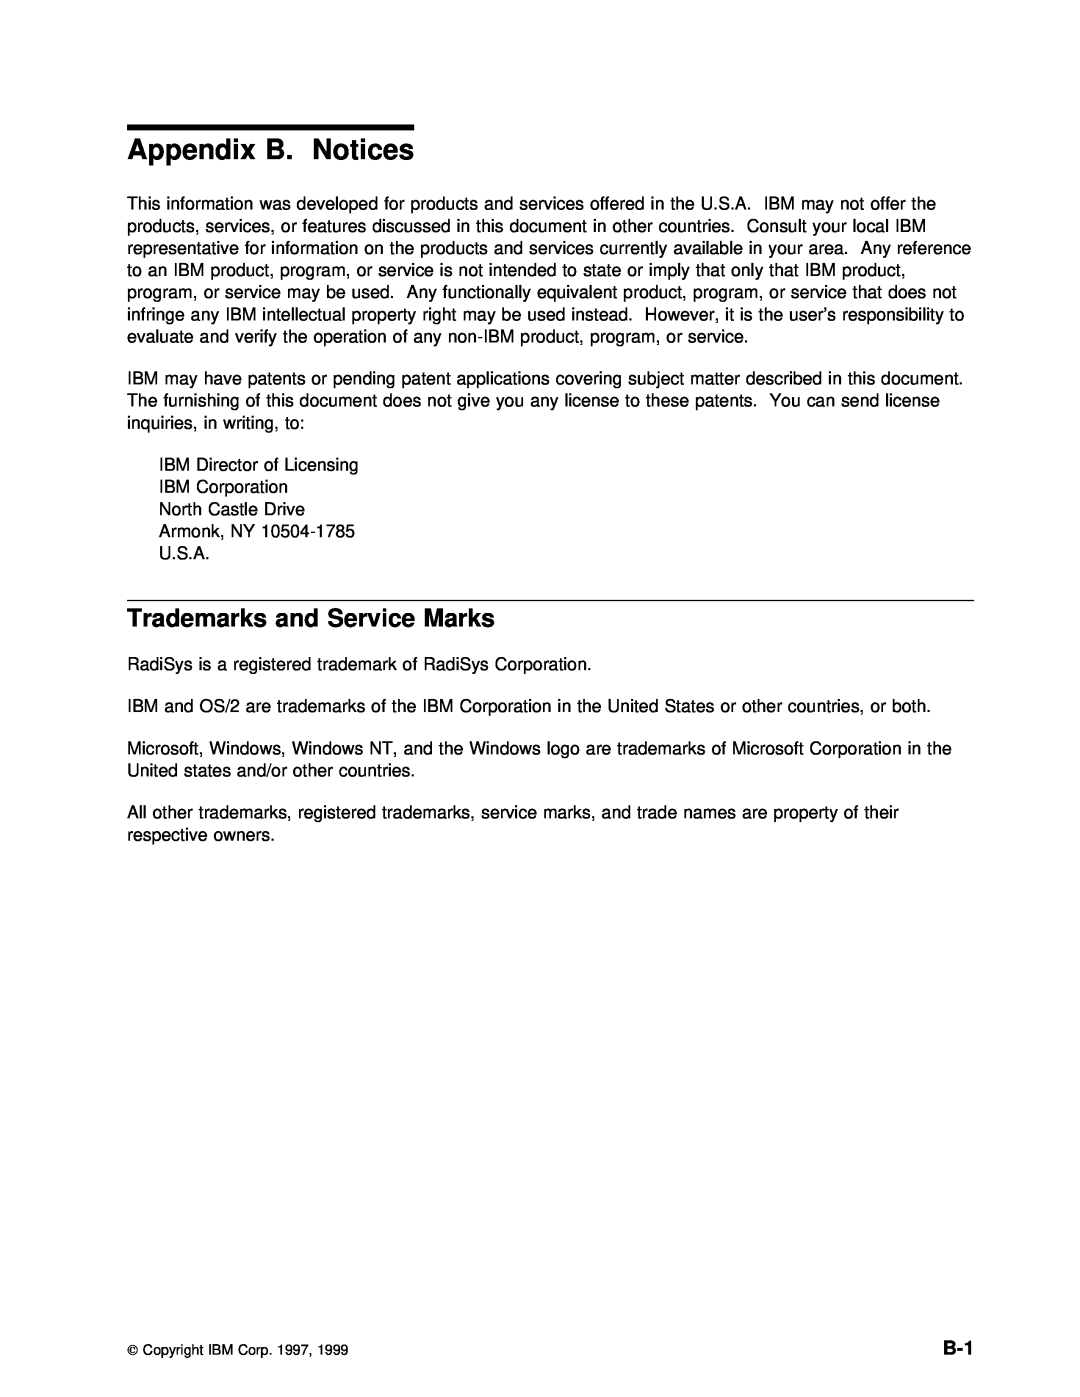 IBM ARTIC186 manual Appendix B. Notices, Trademarks and Service Marks 